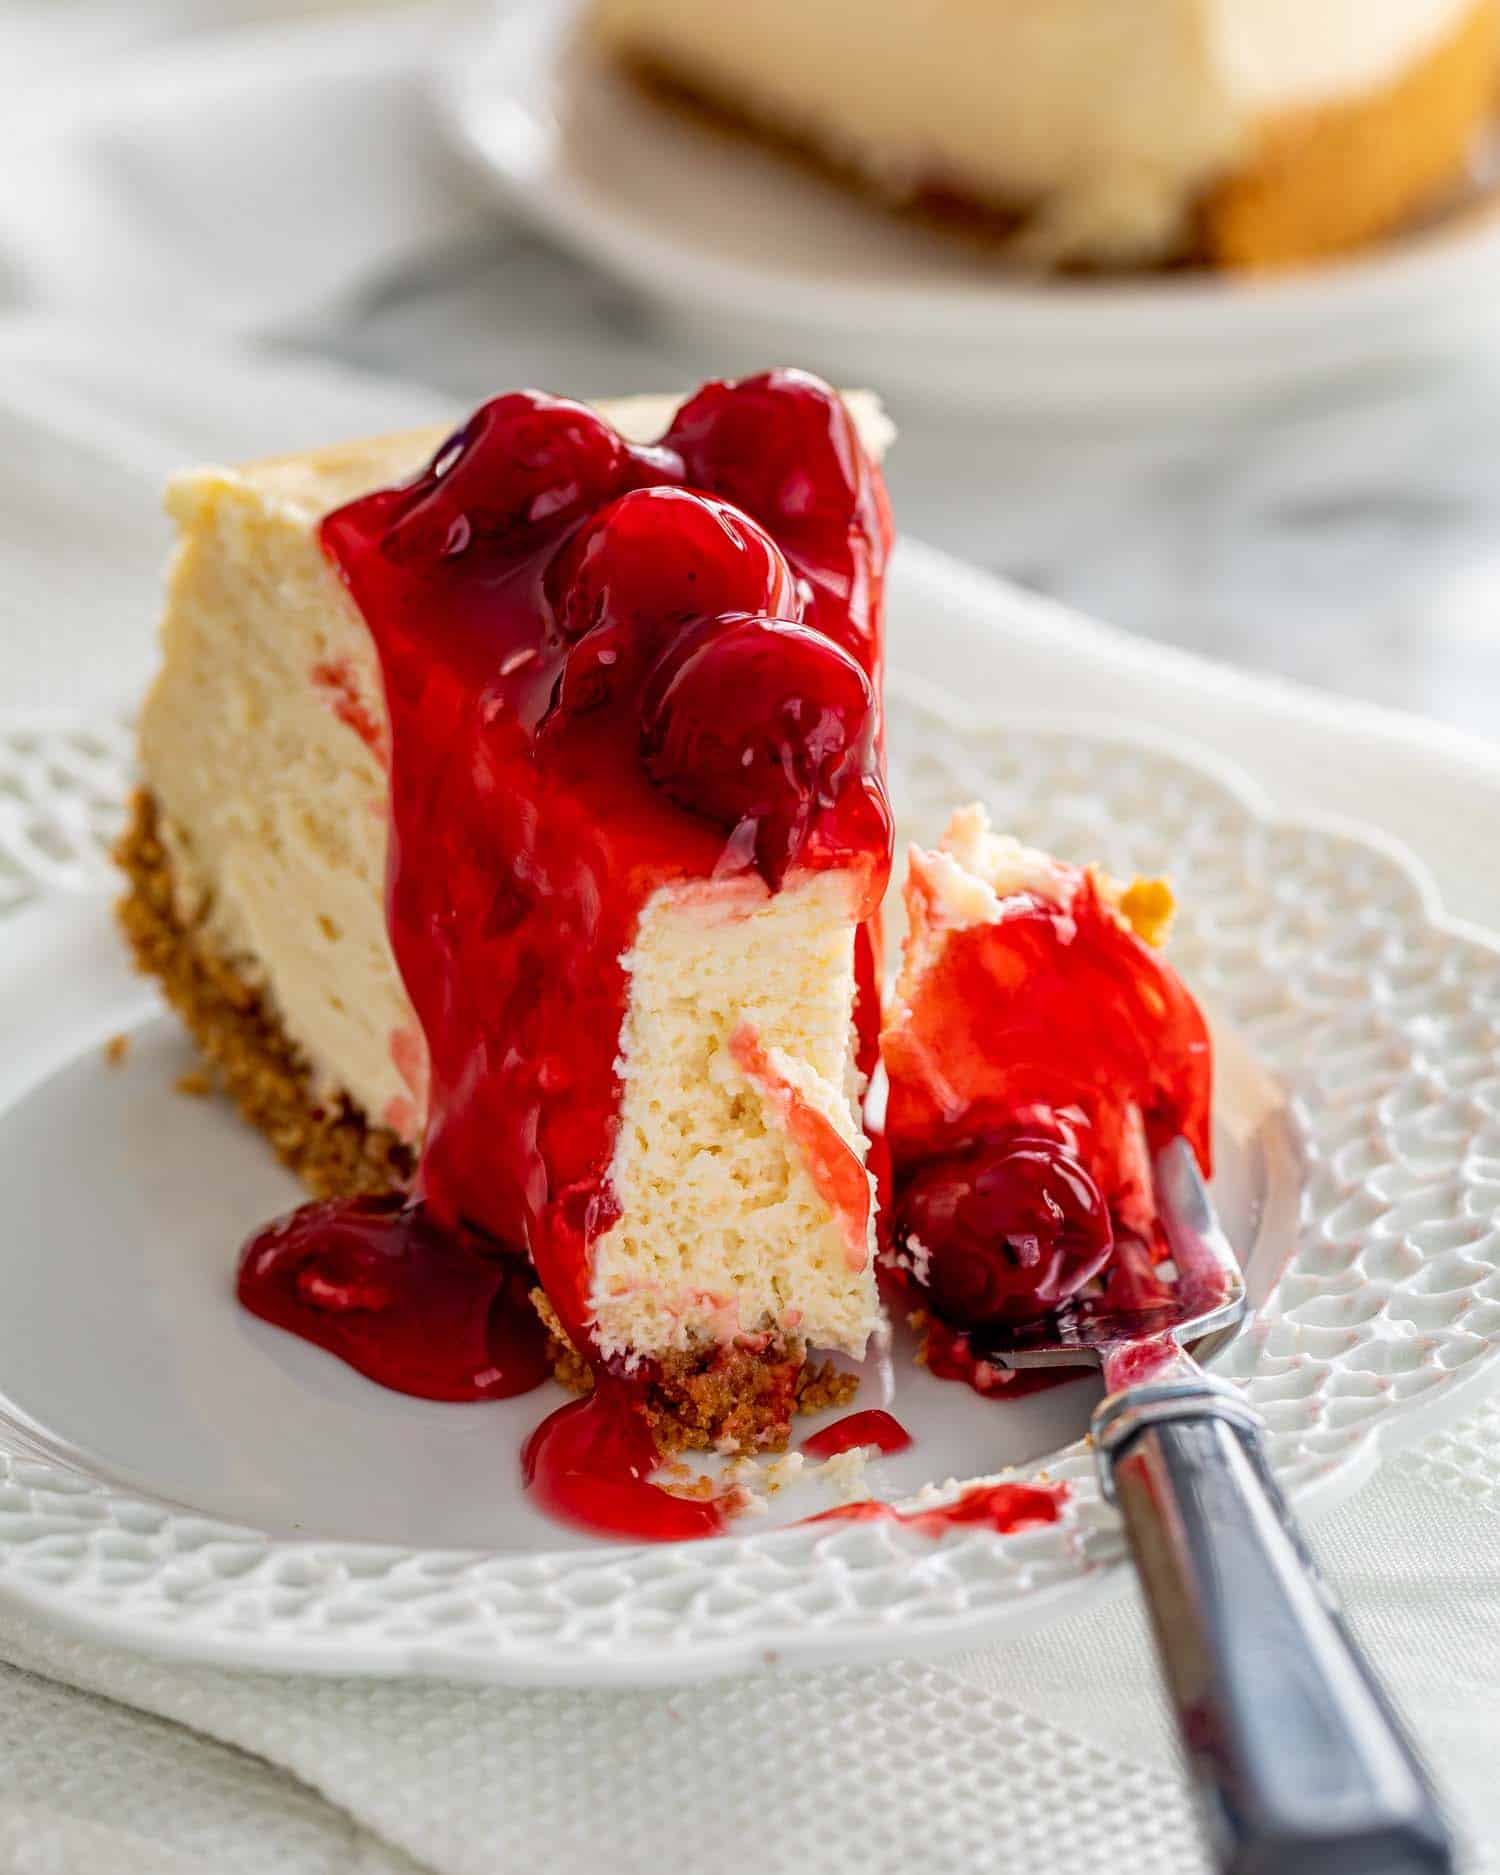 a cheesecake slice with cherry topping on a plate with a fork.